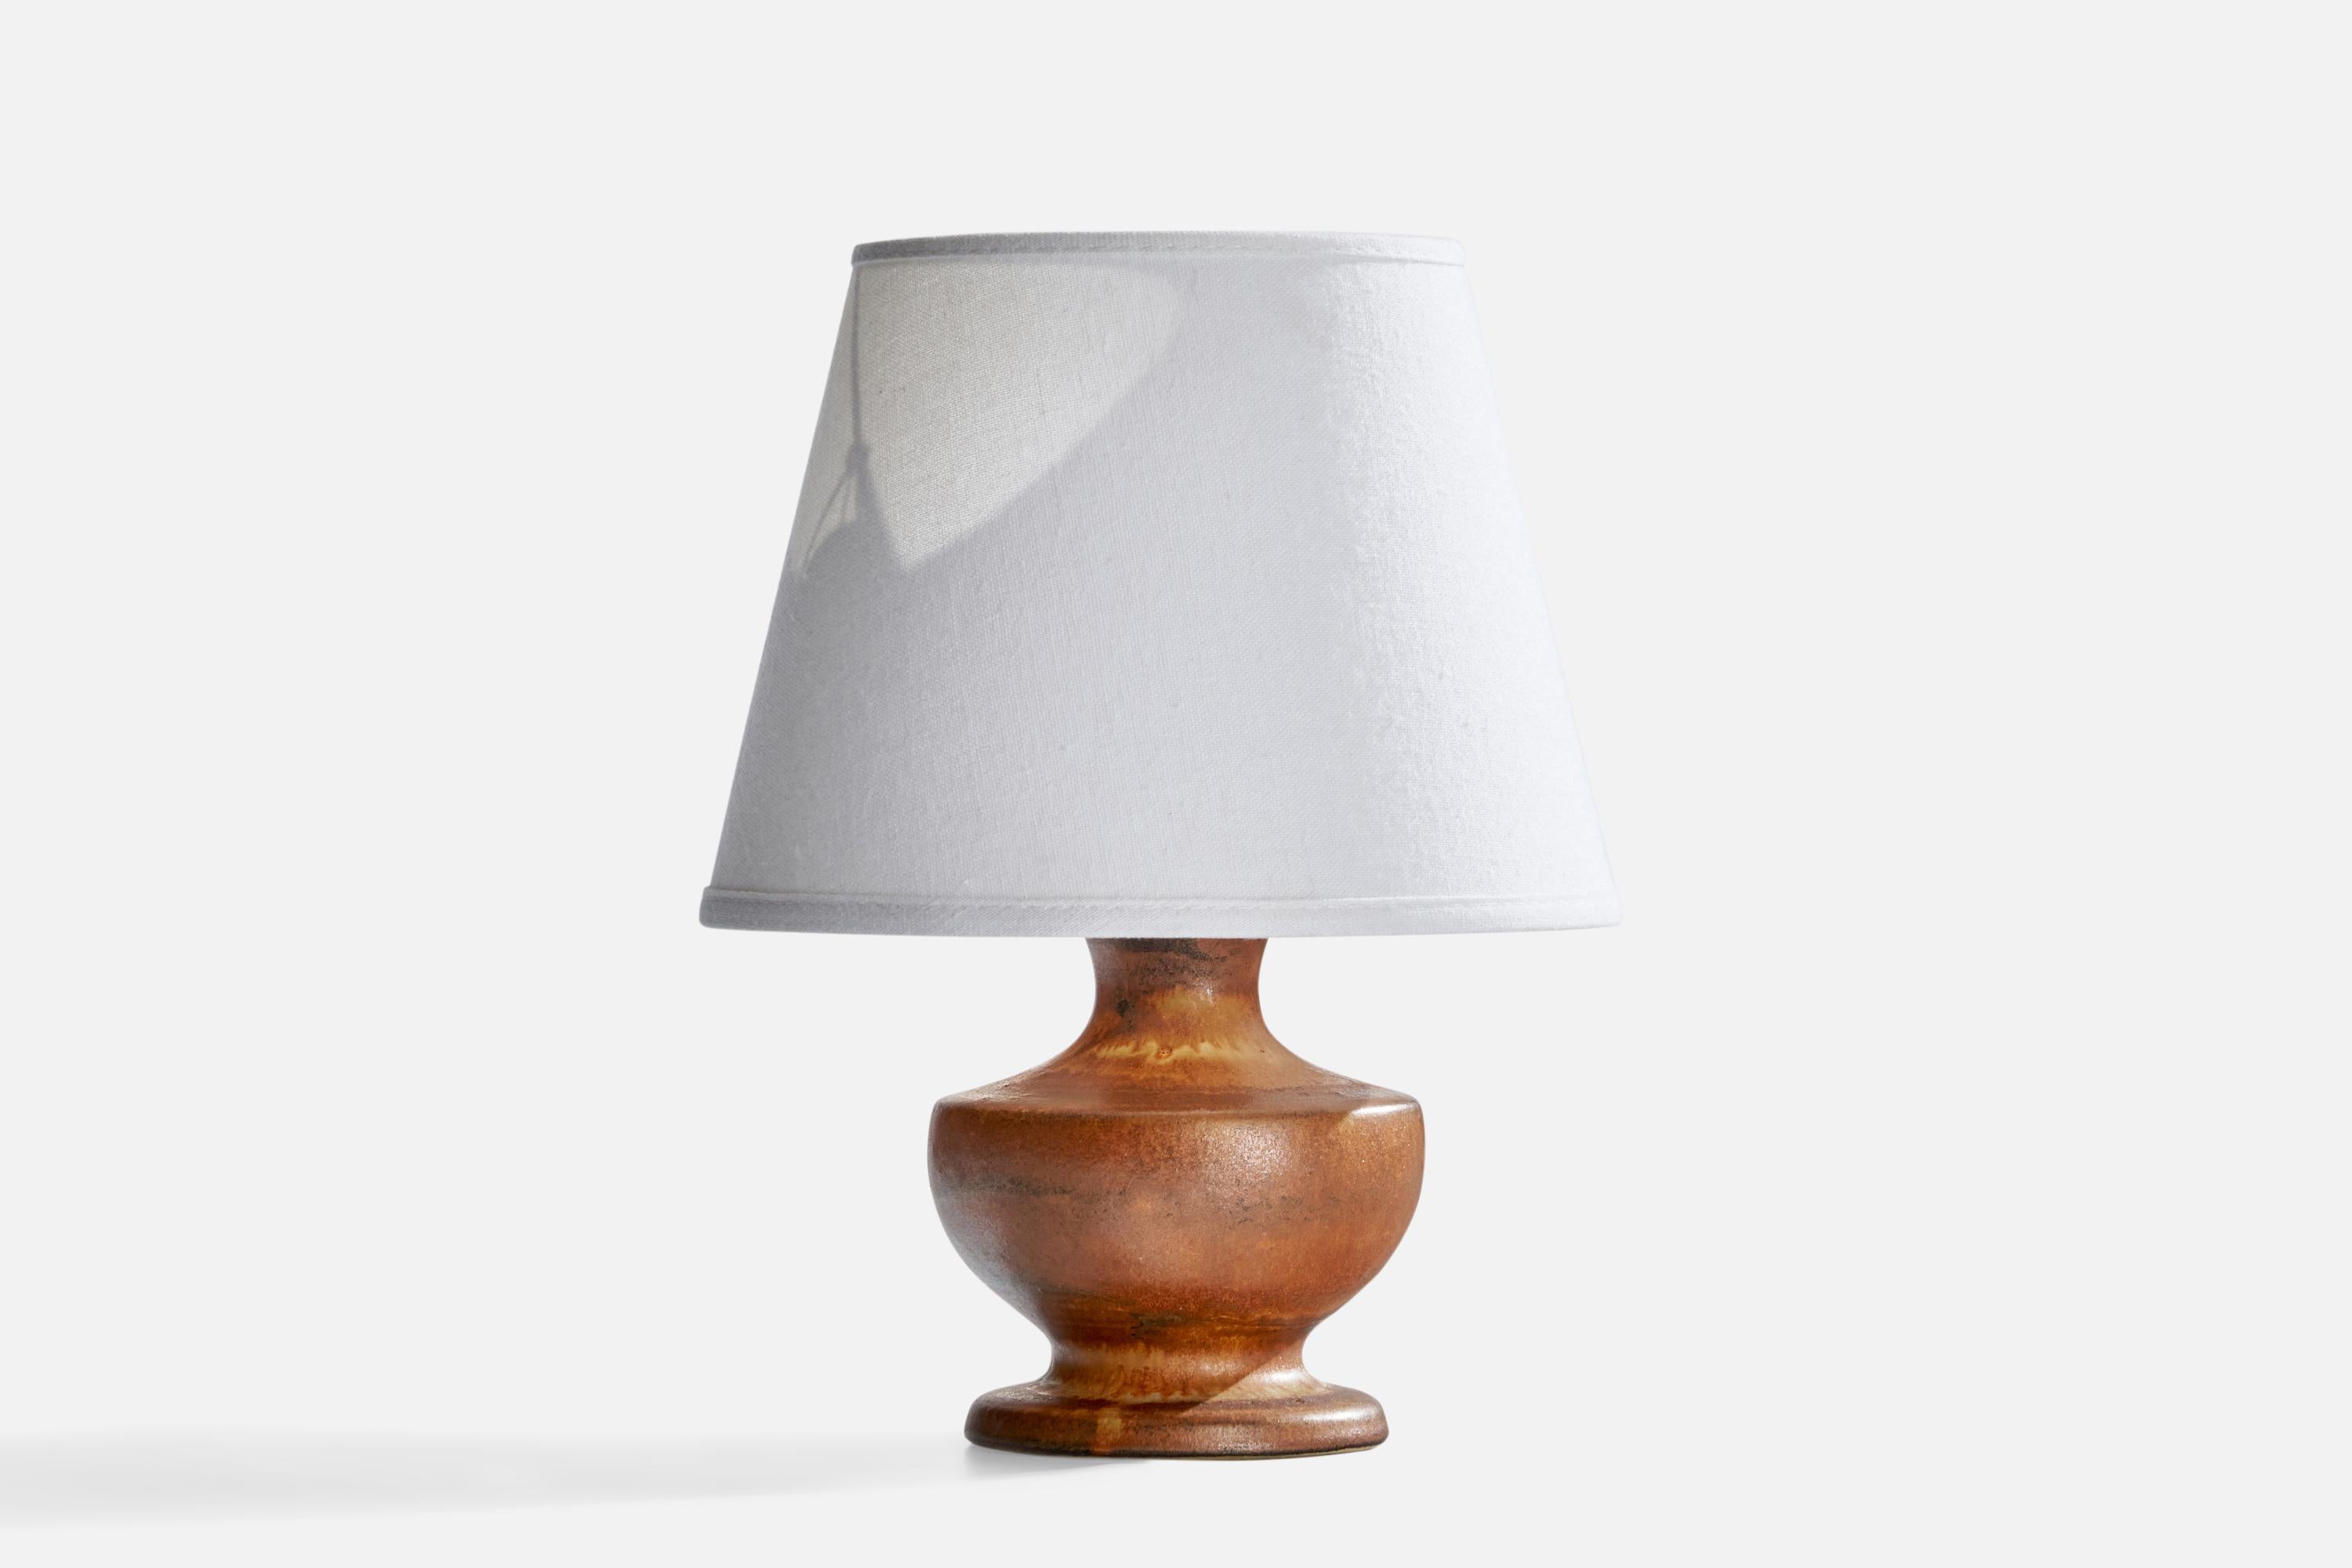 A brown-glazed stoneware table lamp designed by Bruno Karlsson and produced by Ego Stengods, Sweden, c. 1960s.

Dimensions of Lamp (inches): 7”  H x 4.5” Diameter
Dimensions of Shade (inches): 5” Top Diameter x 7.75” Bottom Diameter x 6”